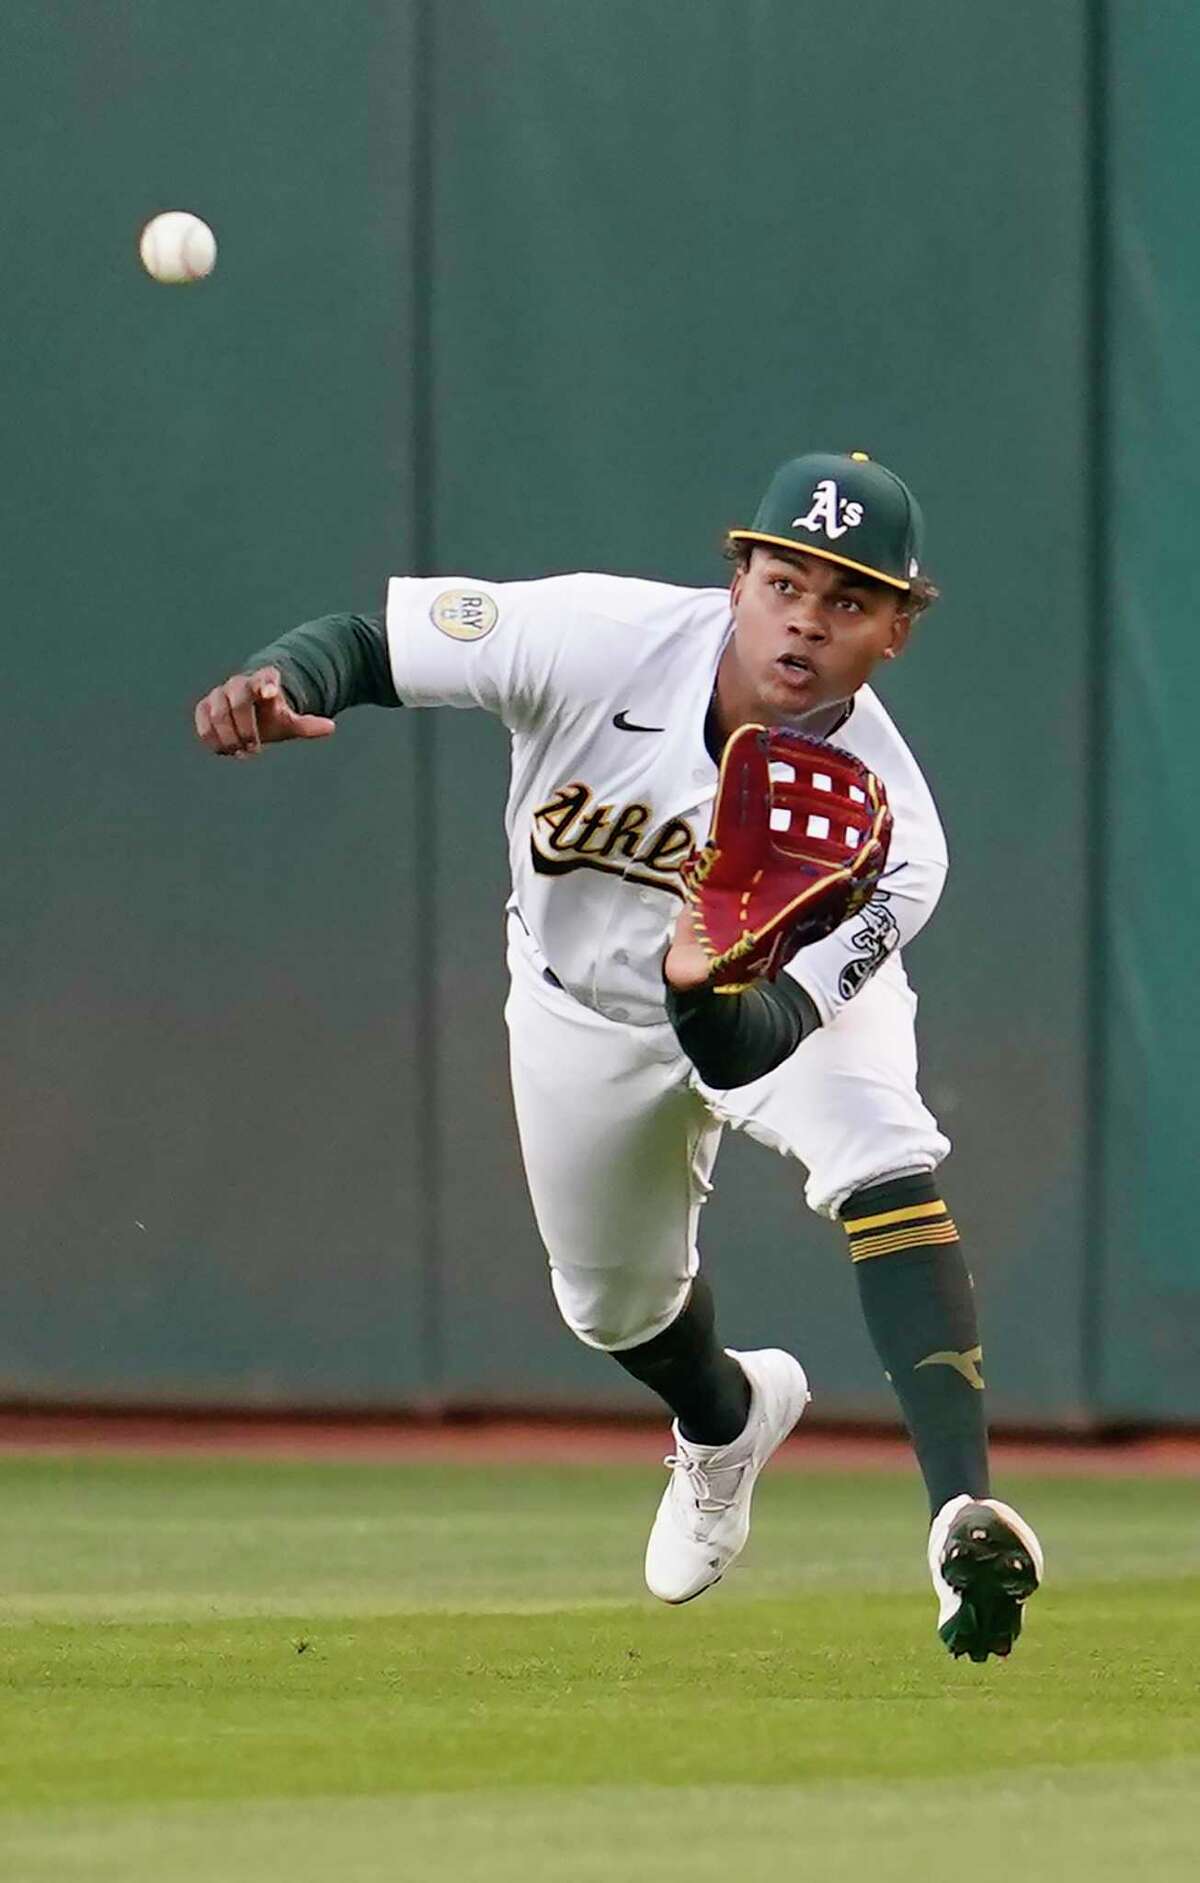 Oakland Athletics center fielder Cristian Pache putting on a show. Oakland Athletics center fielder Cristian Pache catches an RBI-sacrifice fly hit by Texas Rangers' Marcus Semien during the second inning of a baseball game in Oakland, Calif., Friday, April 22, 2022. (AP Photo/Jeff Chiu)